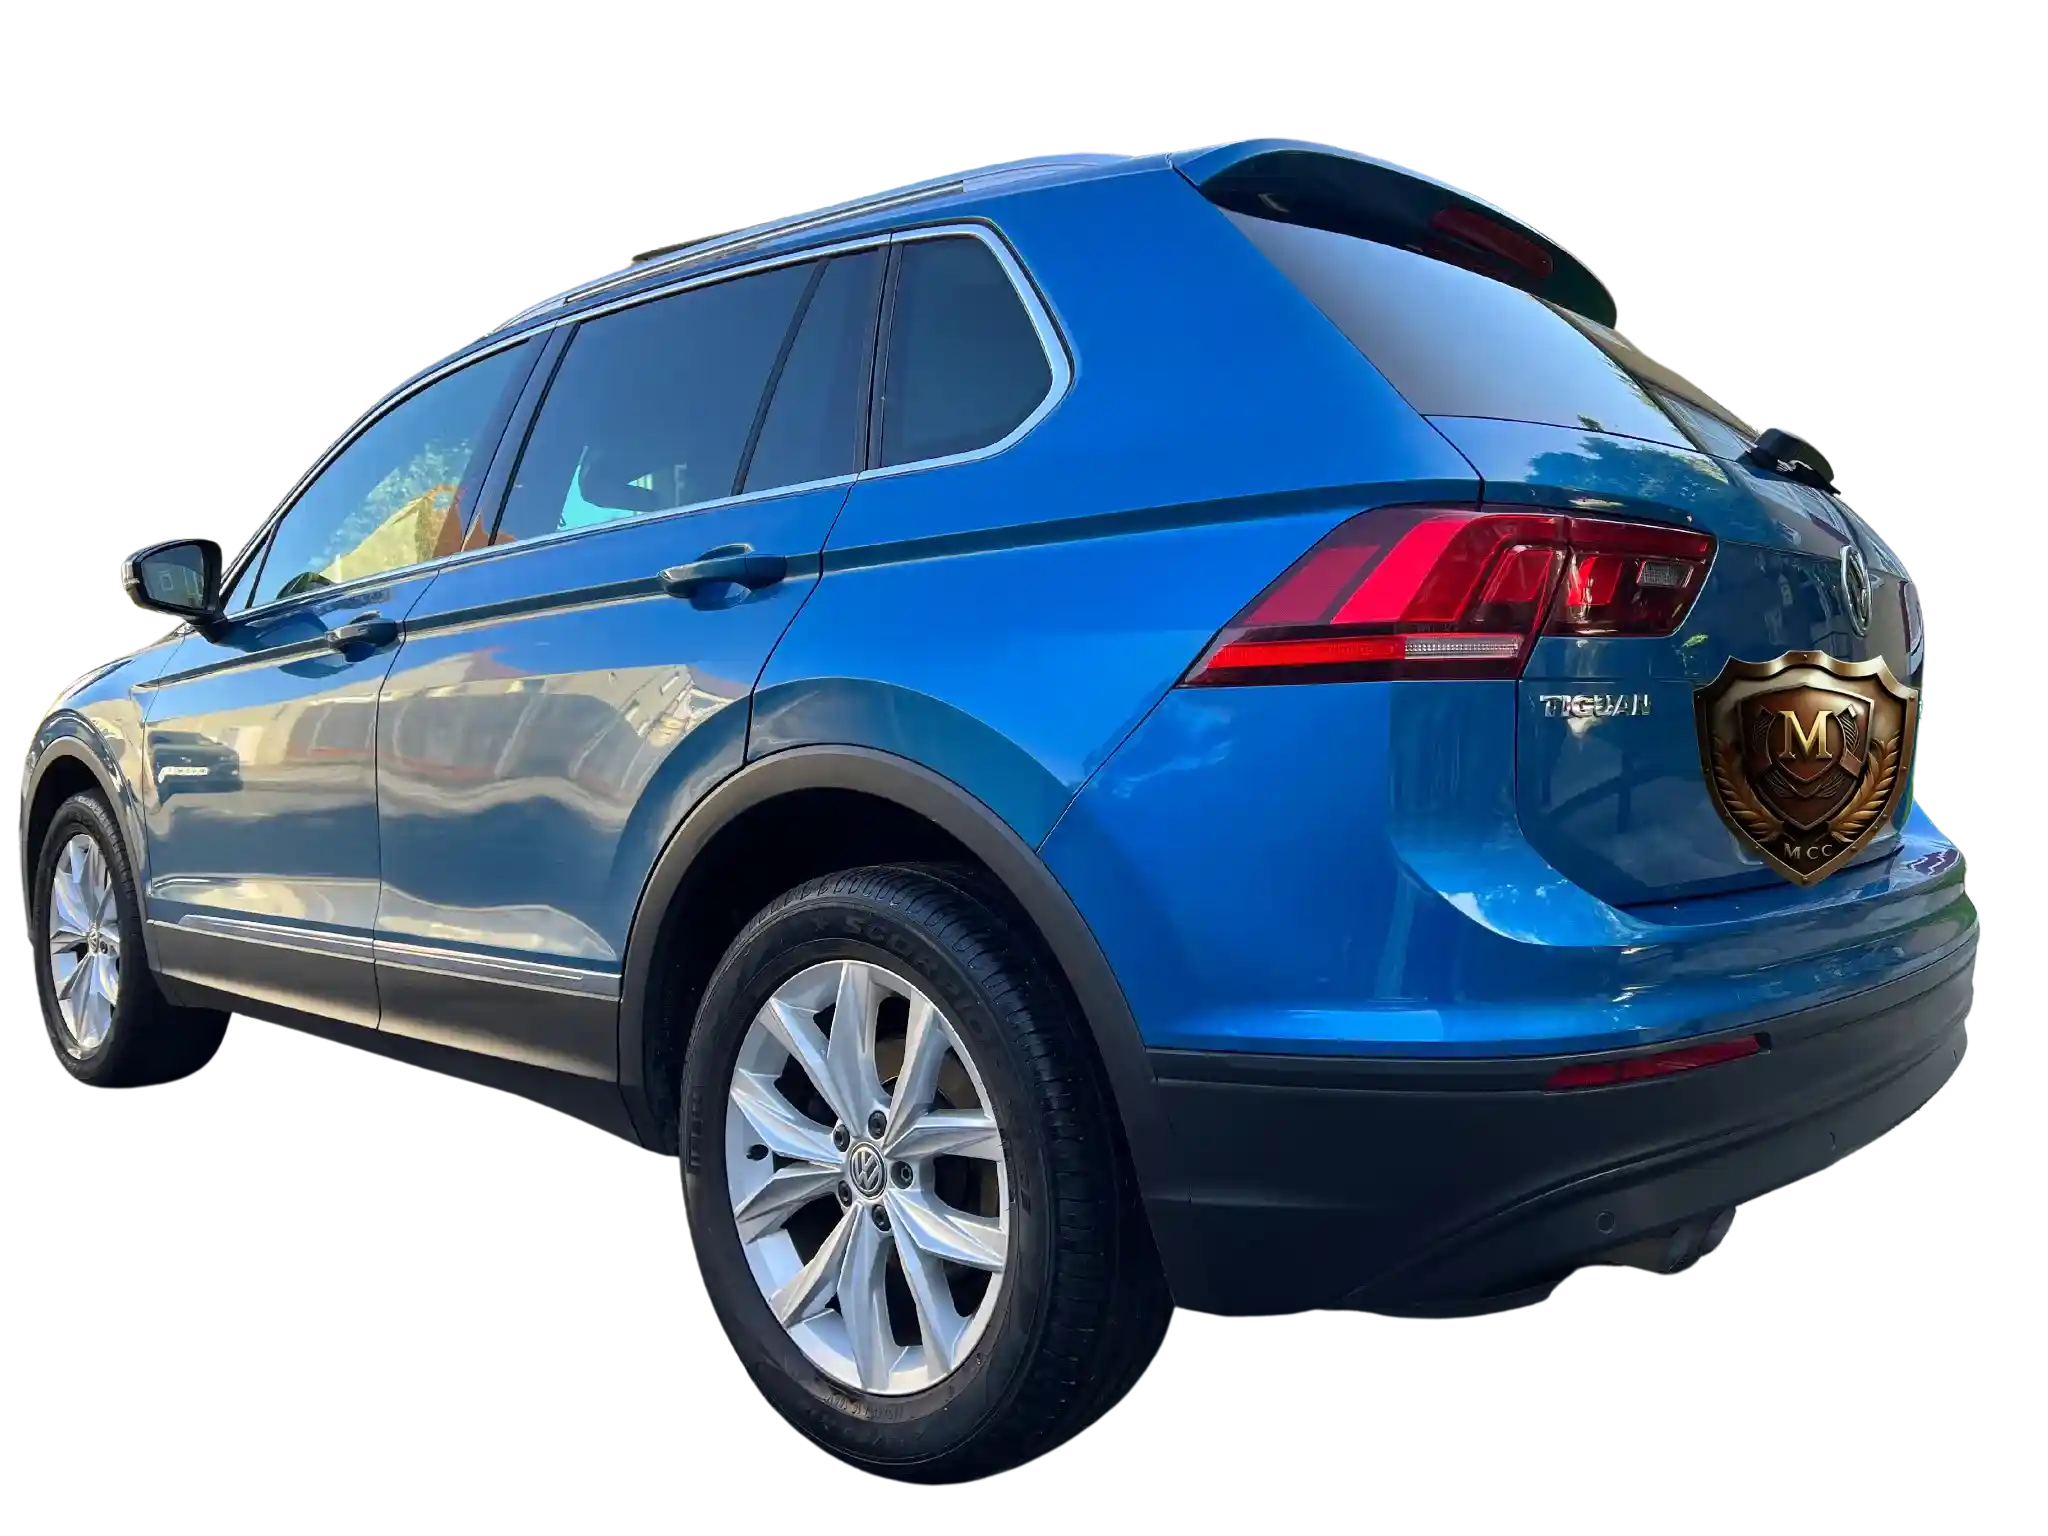 Eco-friendly waterless valeting of a Volkswagen Tiguan 4Motion in Hammersmith, enhancing its rugged elegance and reflecting corporate environmental values.